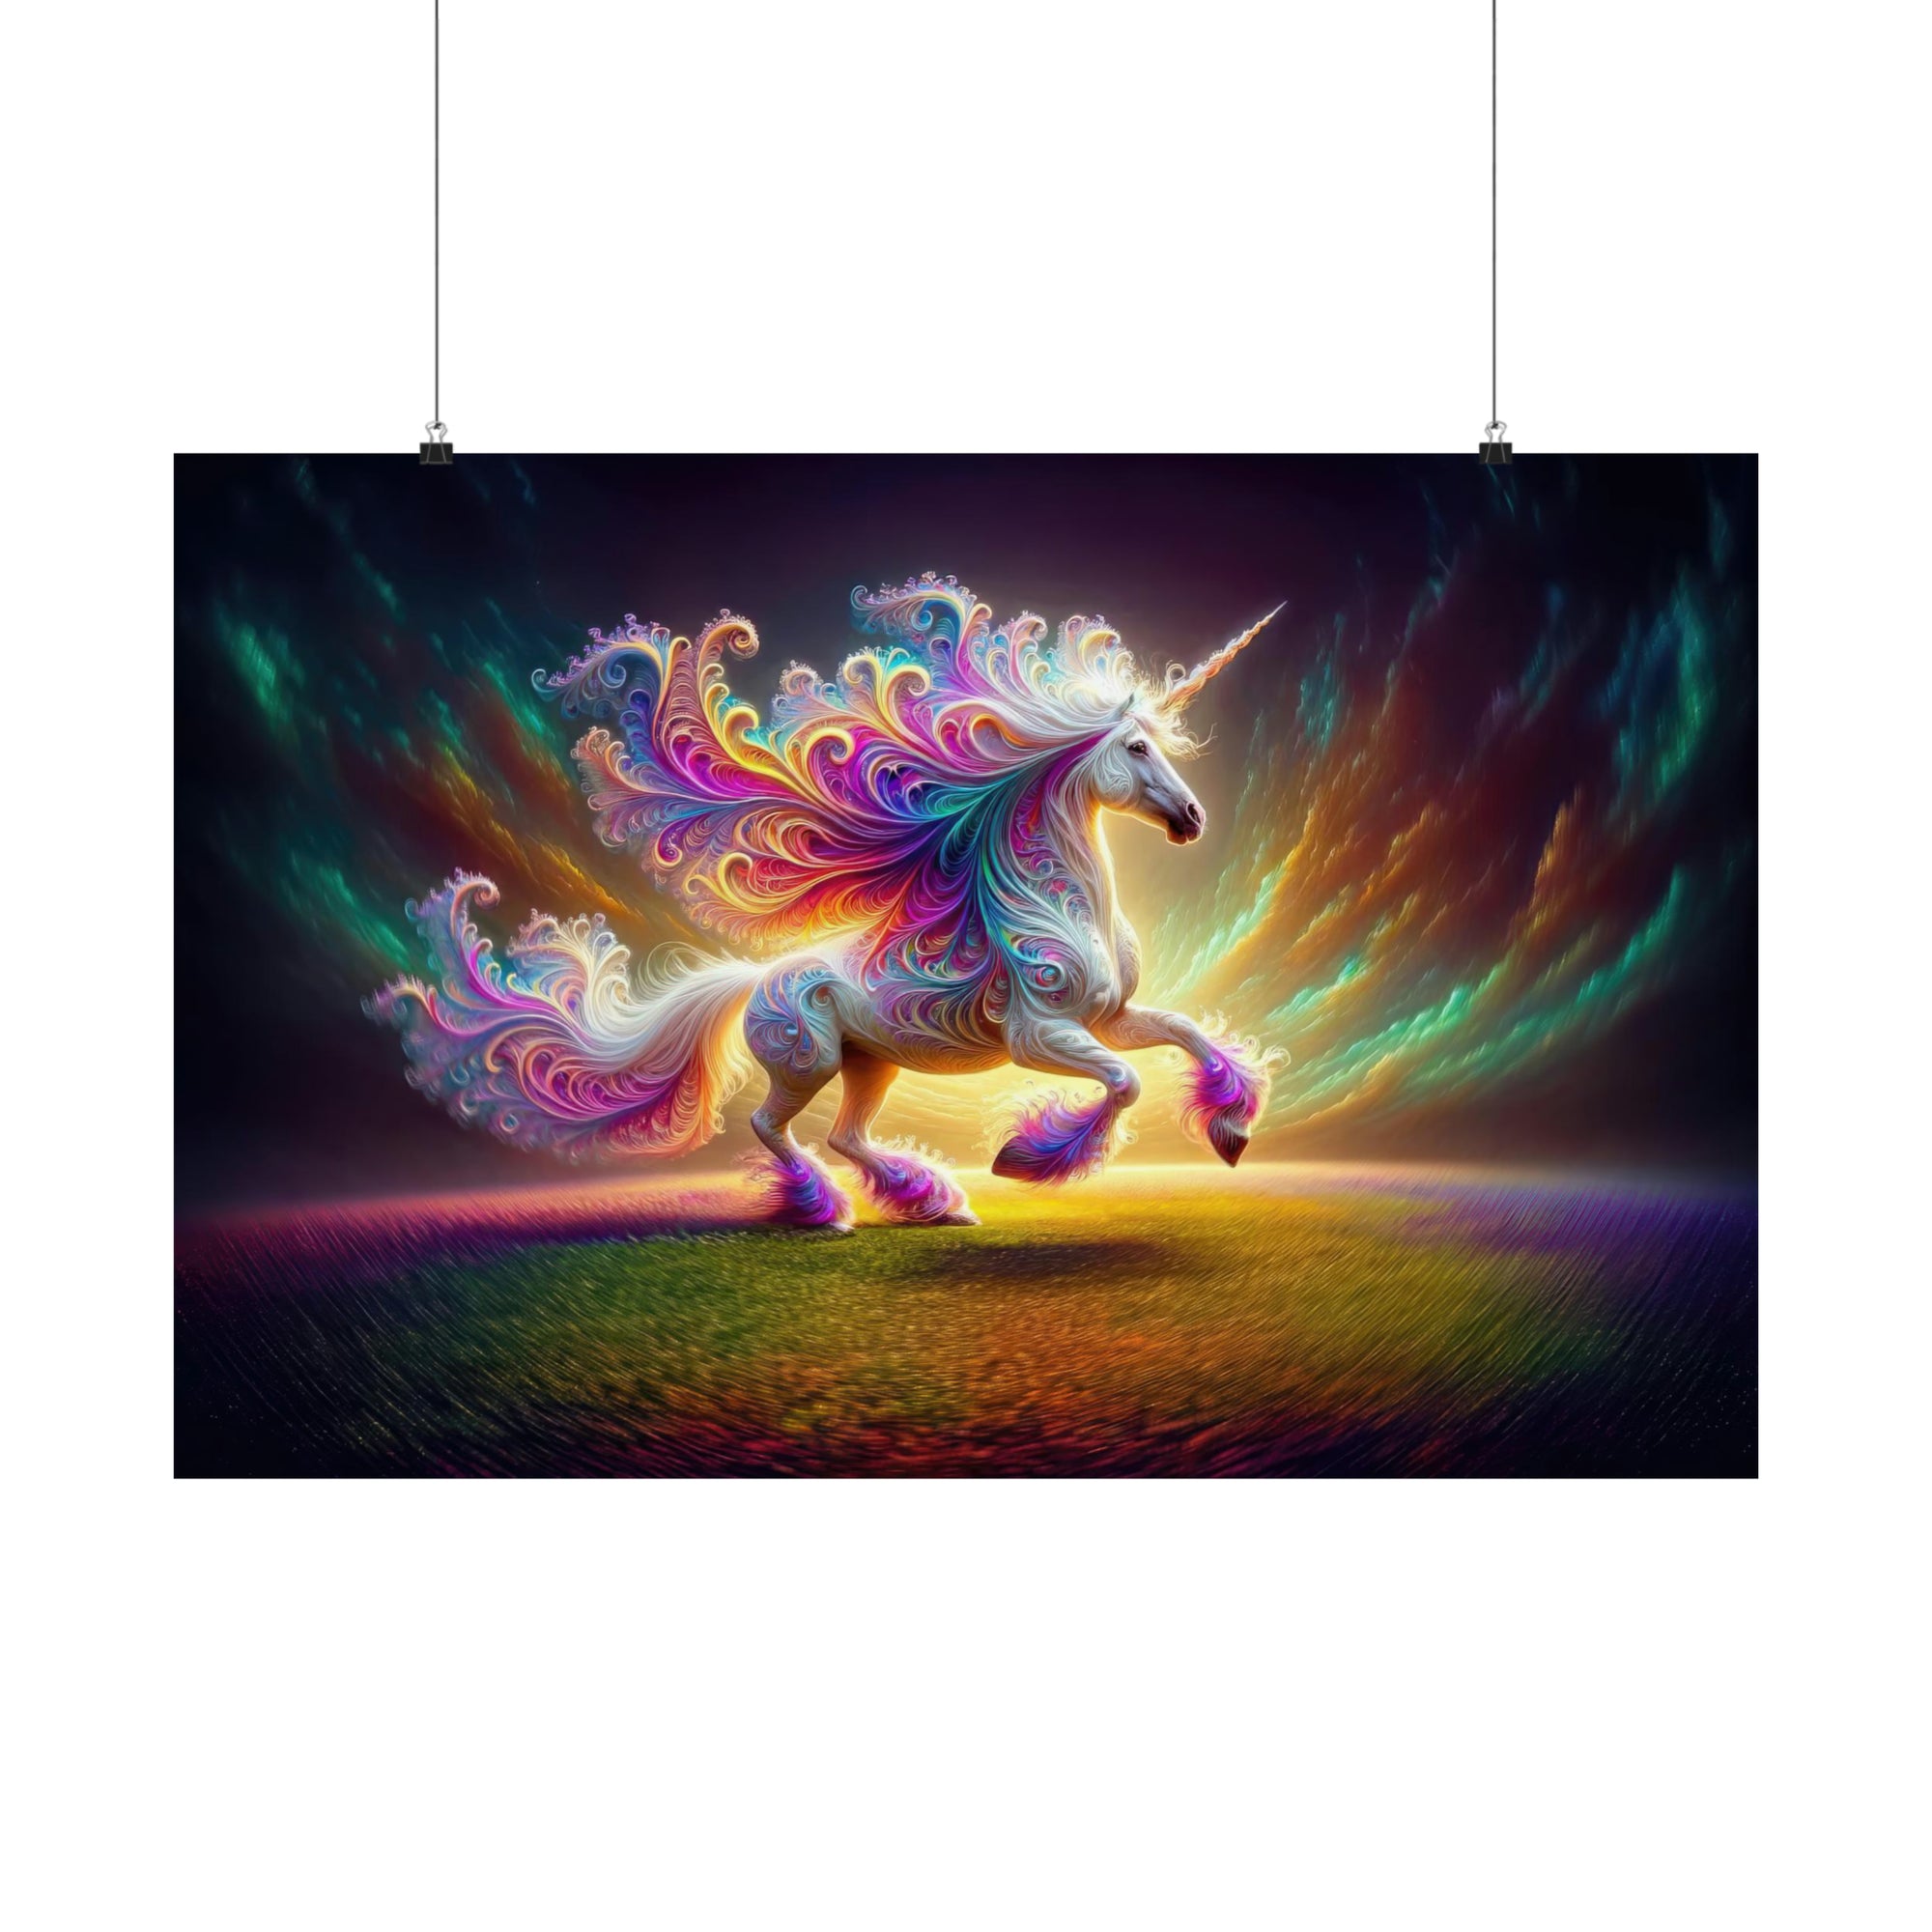 The Unicorn's Realm Poster